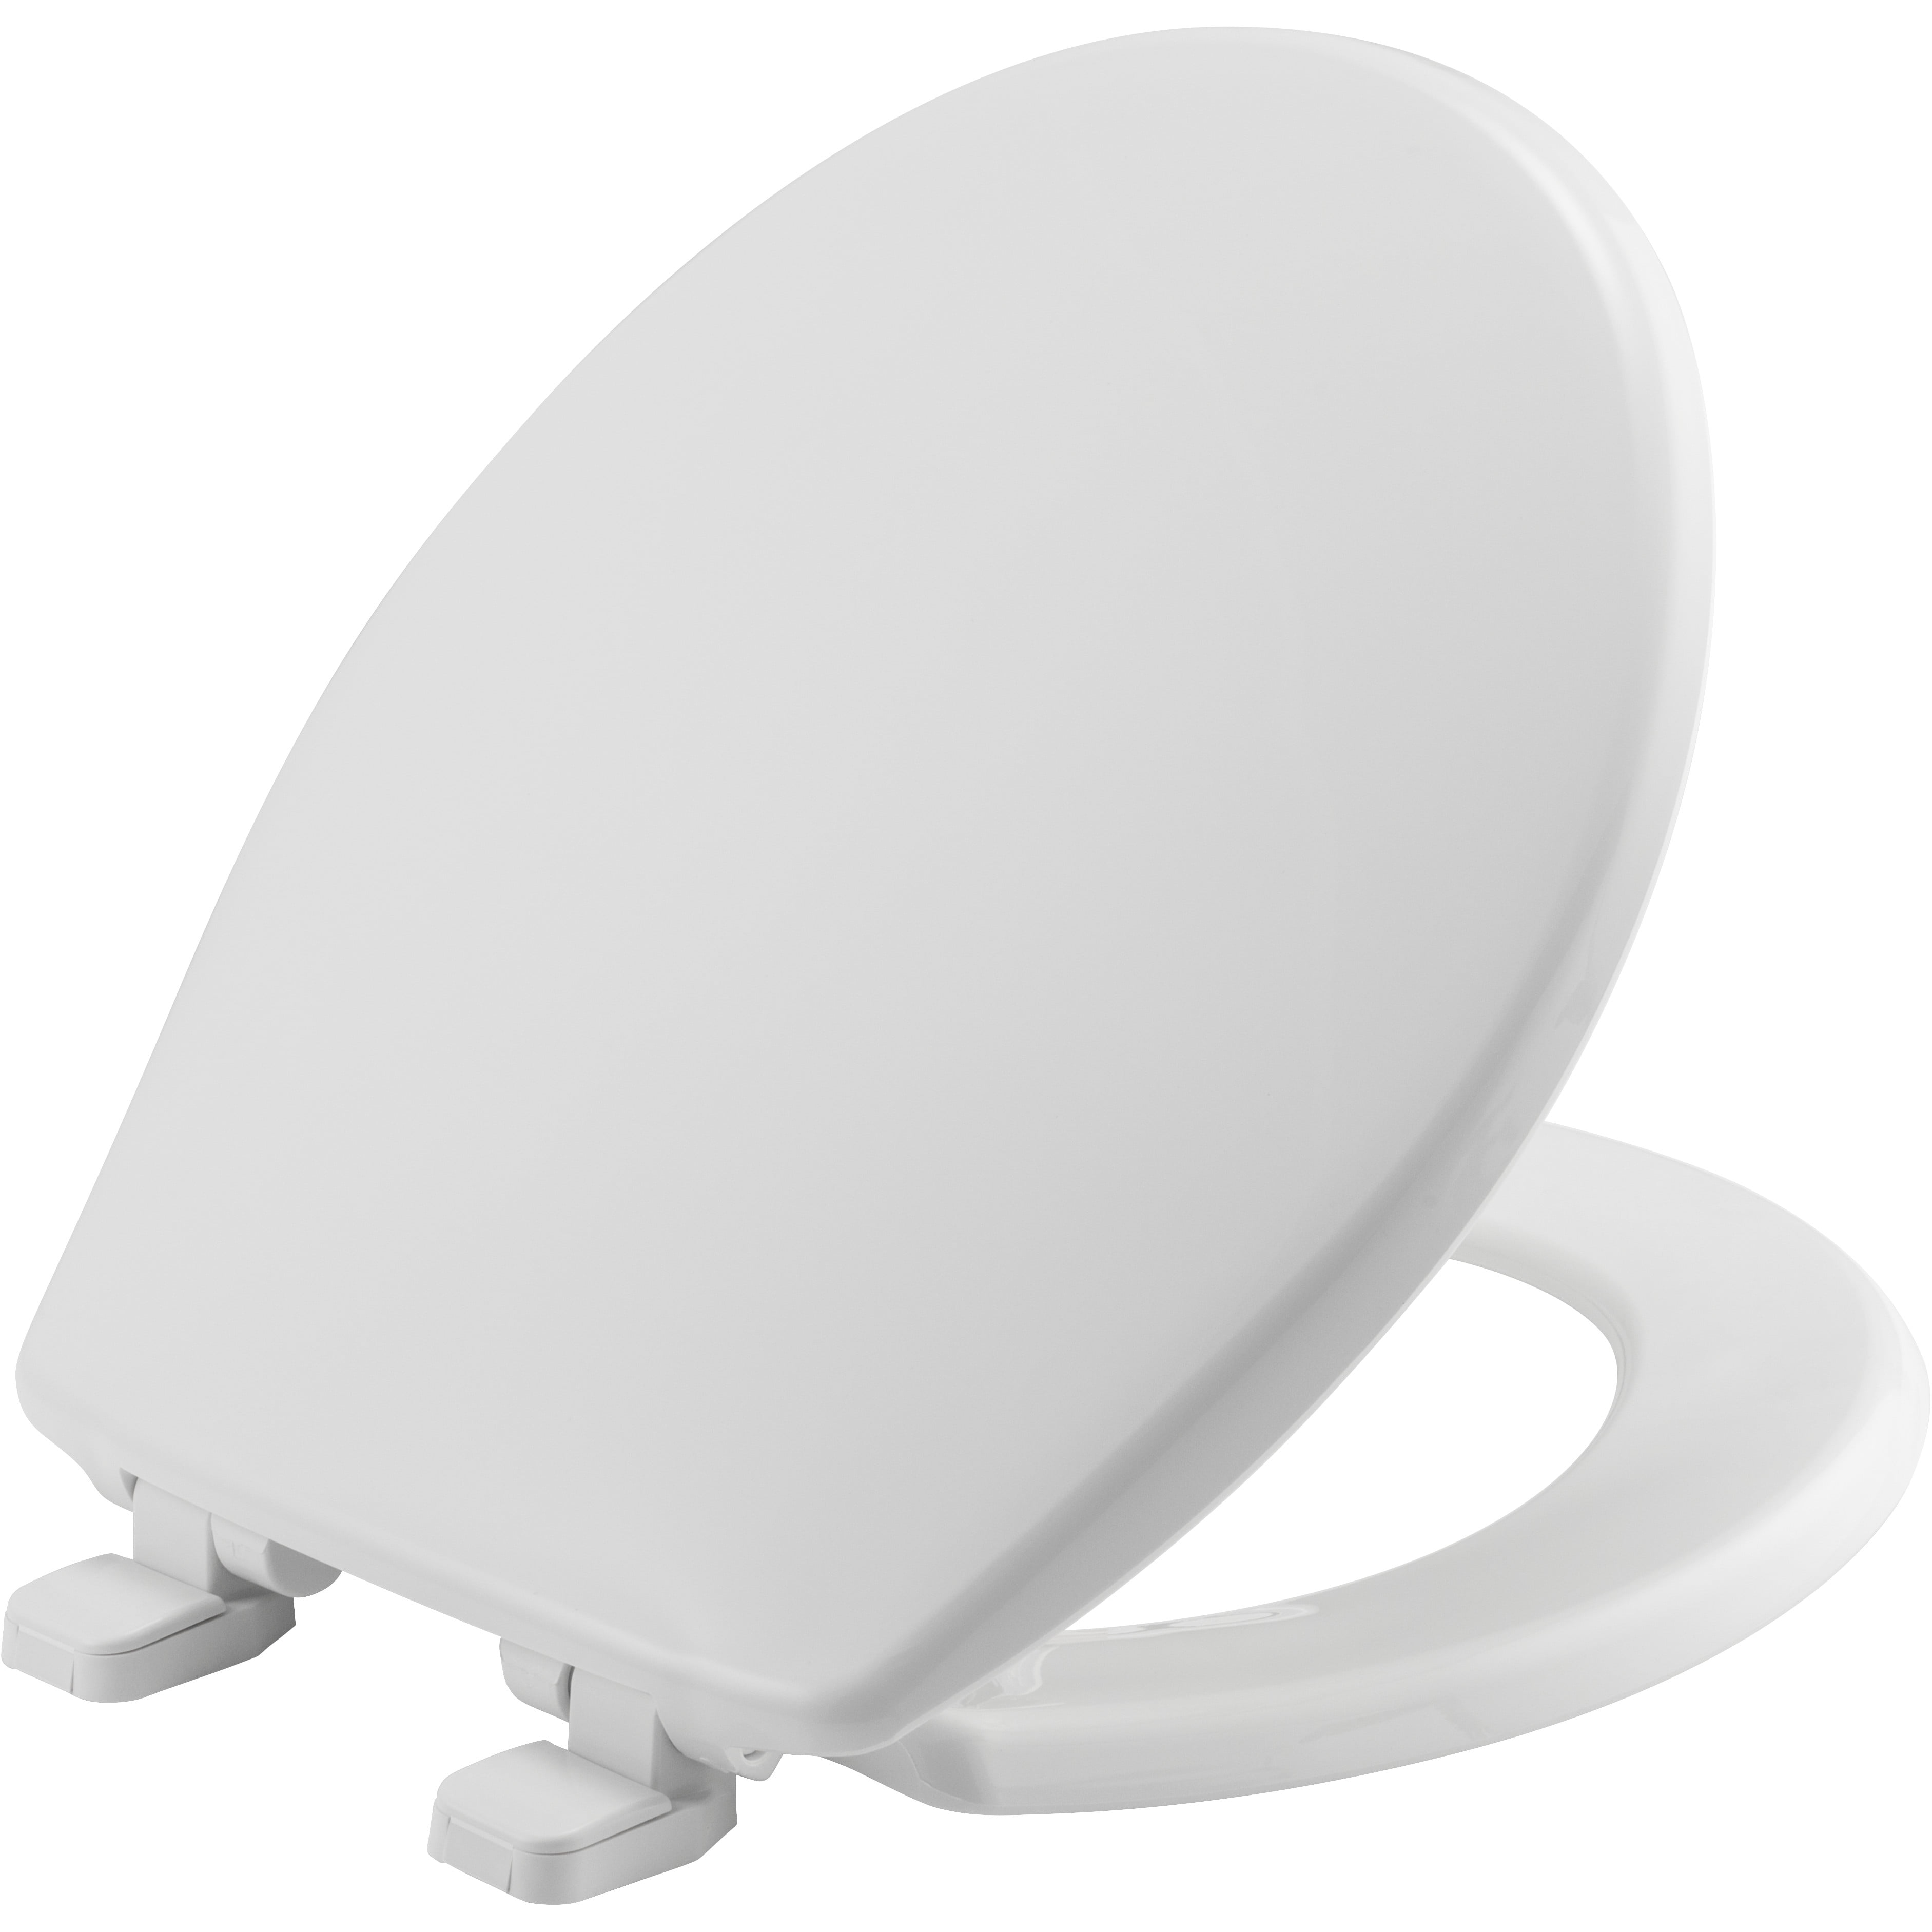 Mayfair Butterfly Embroidered Soft Toilet Seat With Easy Clean Amp; Change Hing 